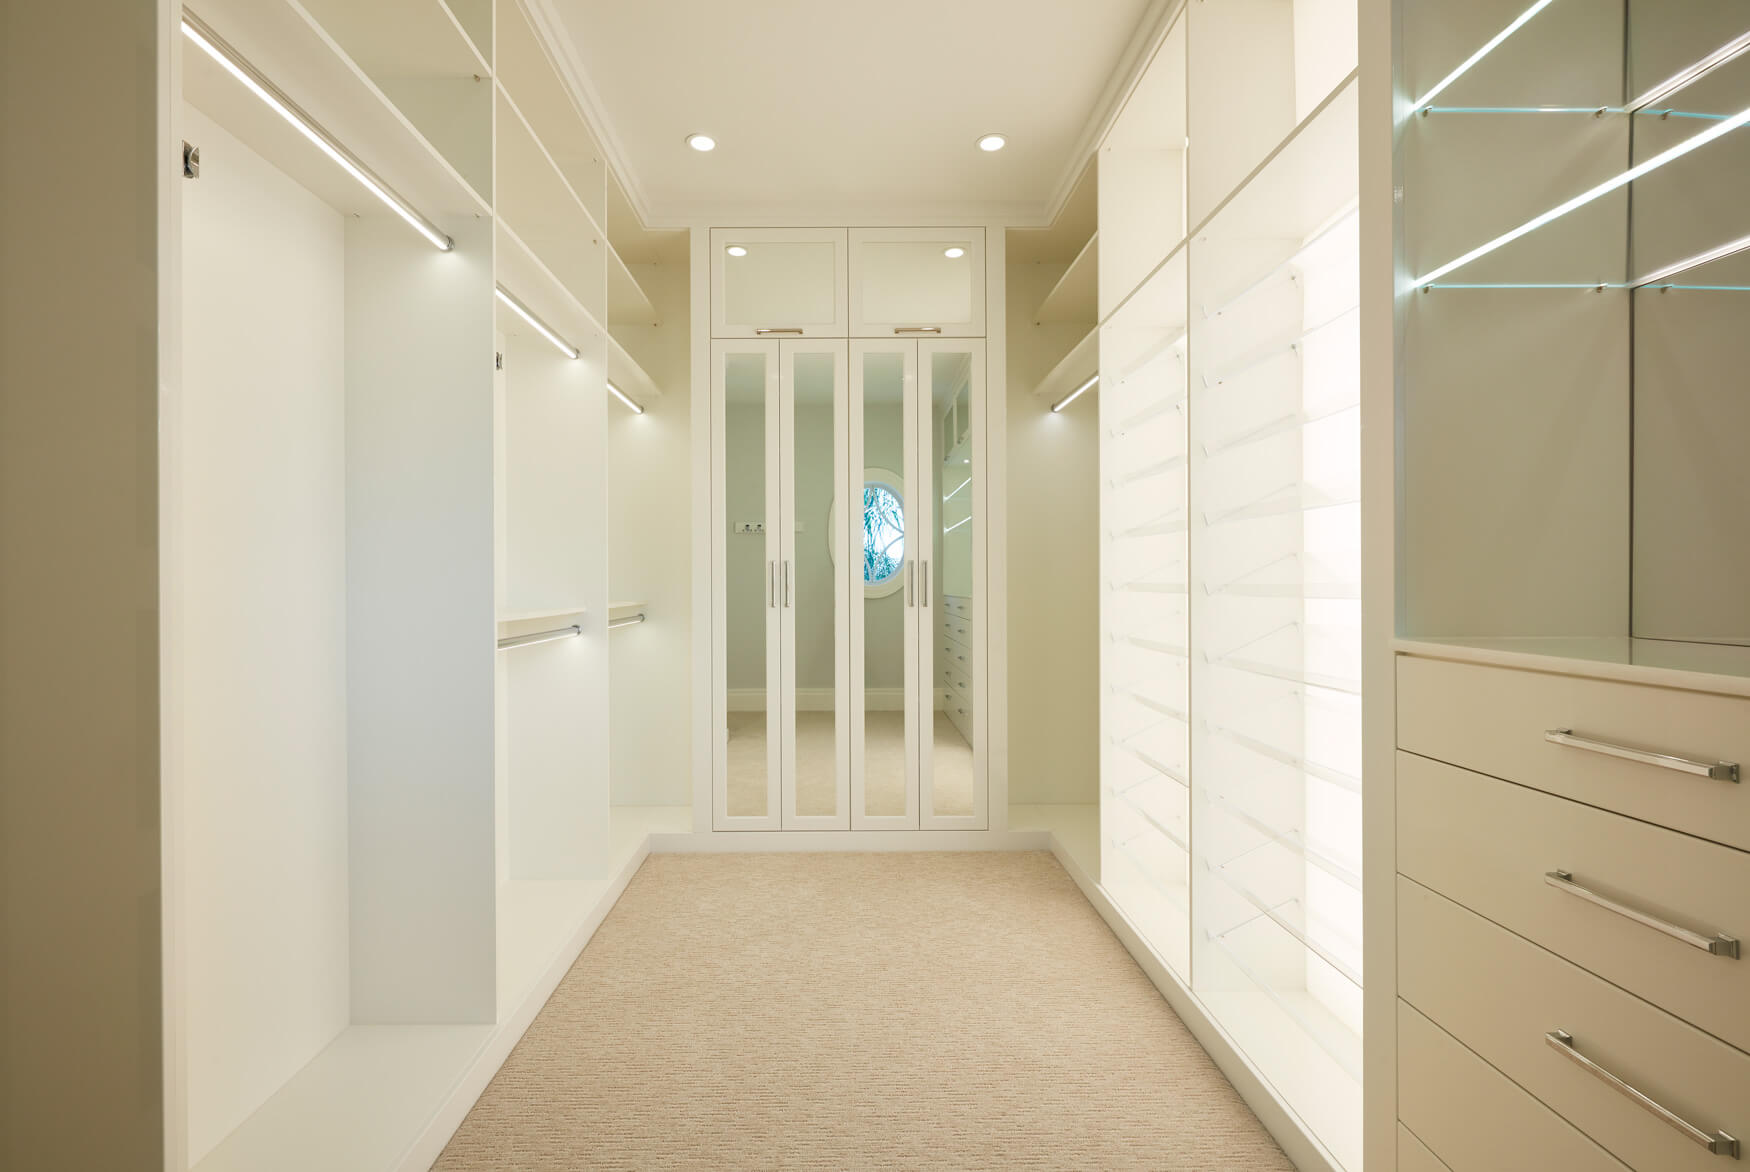 A walk in closet with many glass doors and shelves.